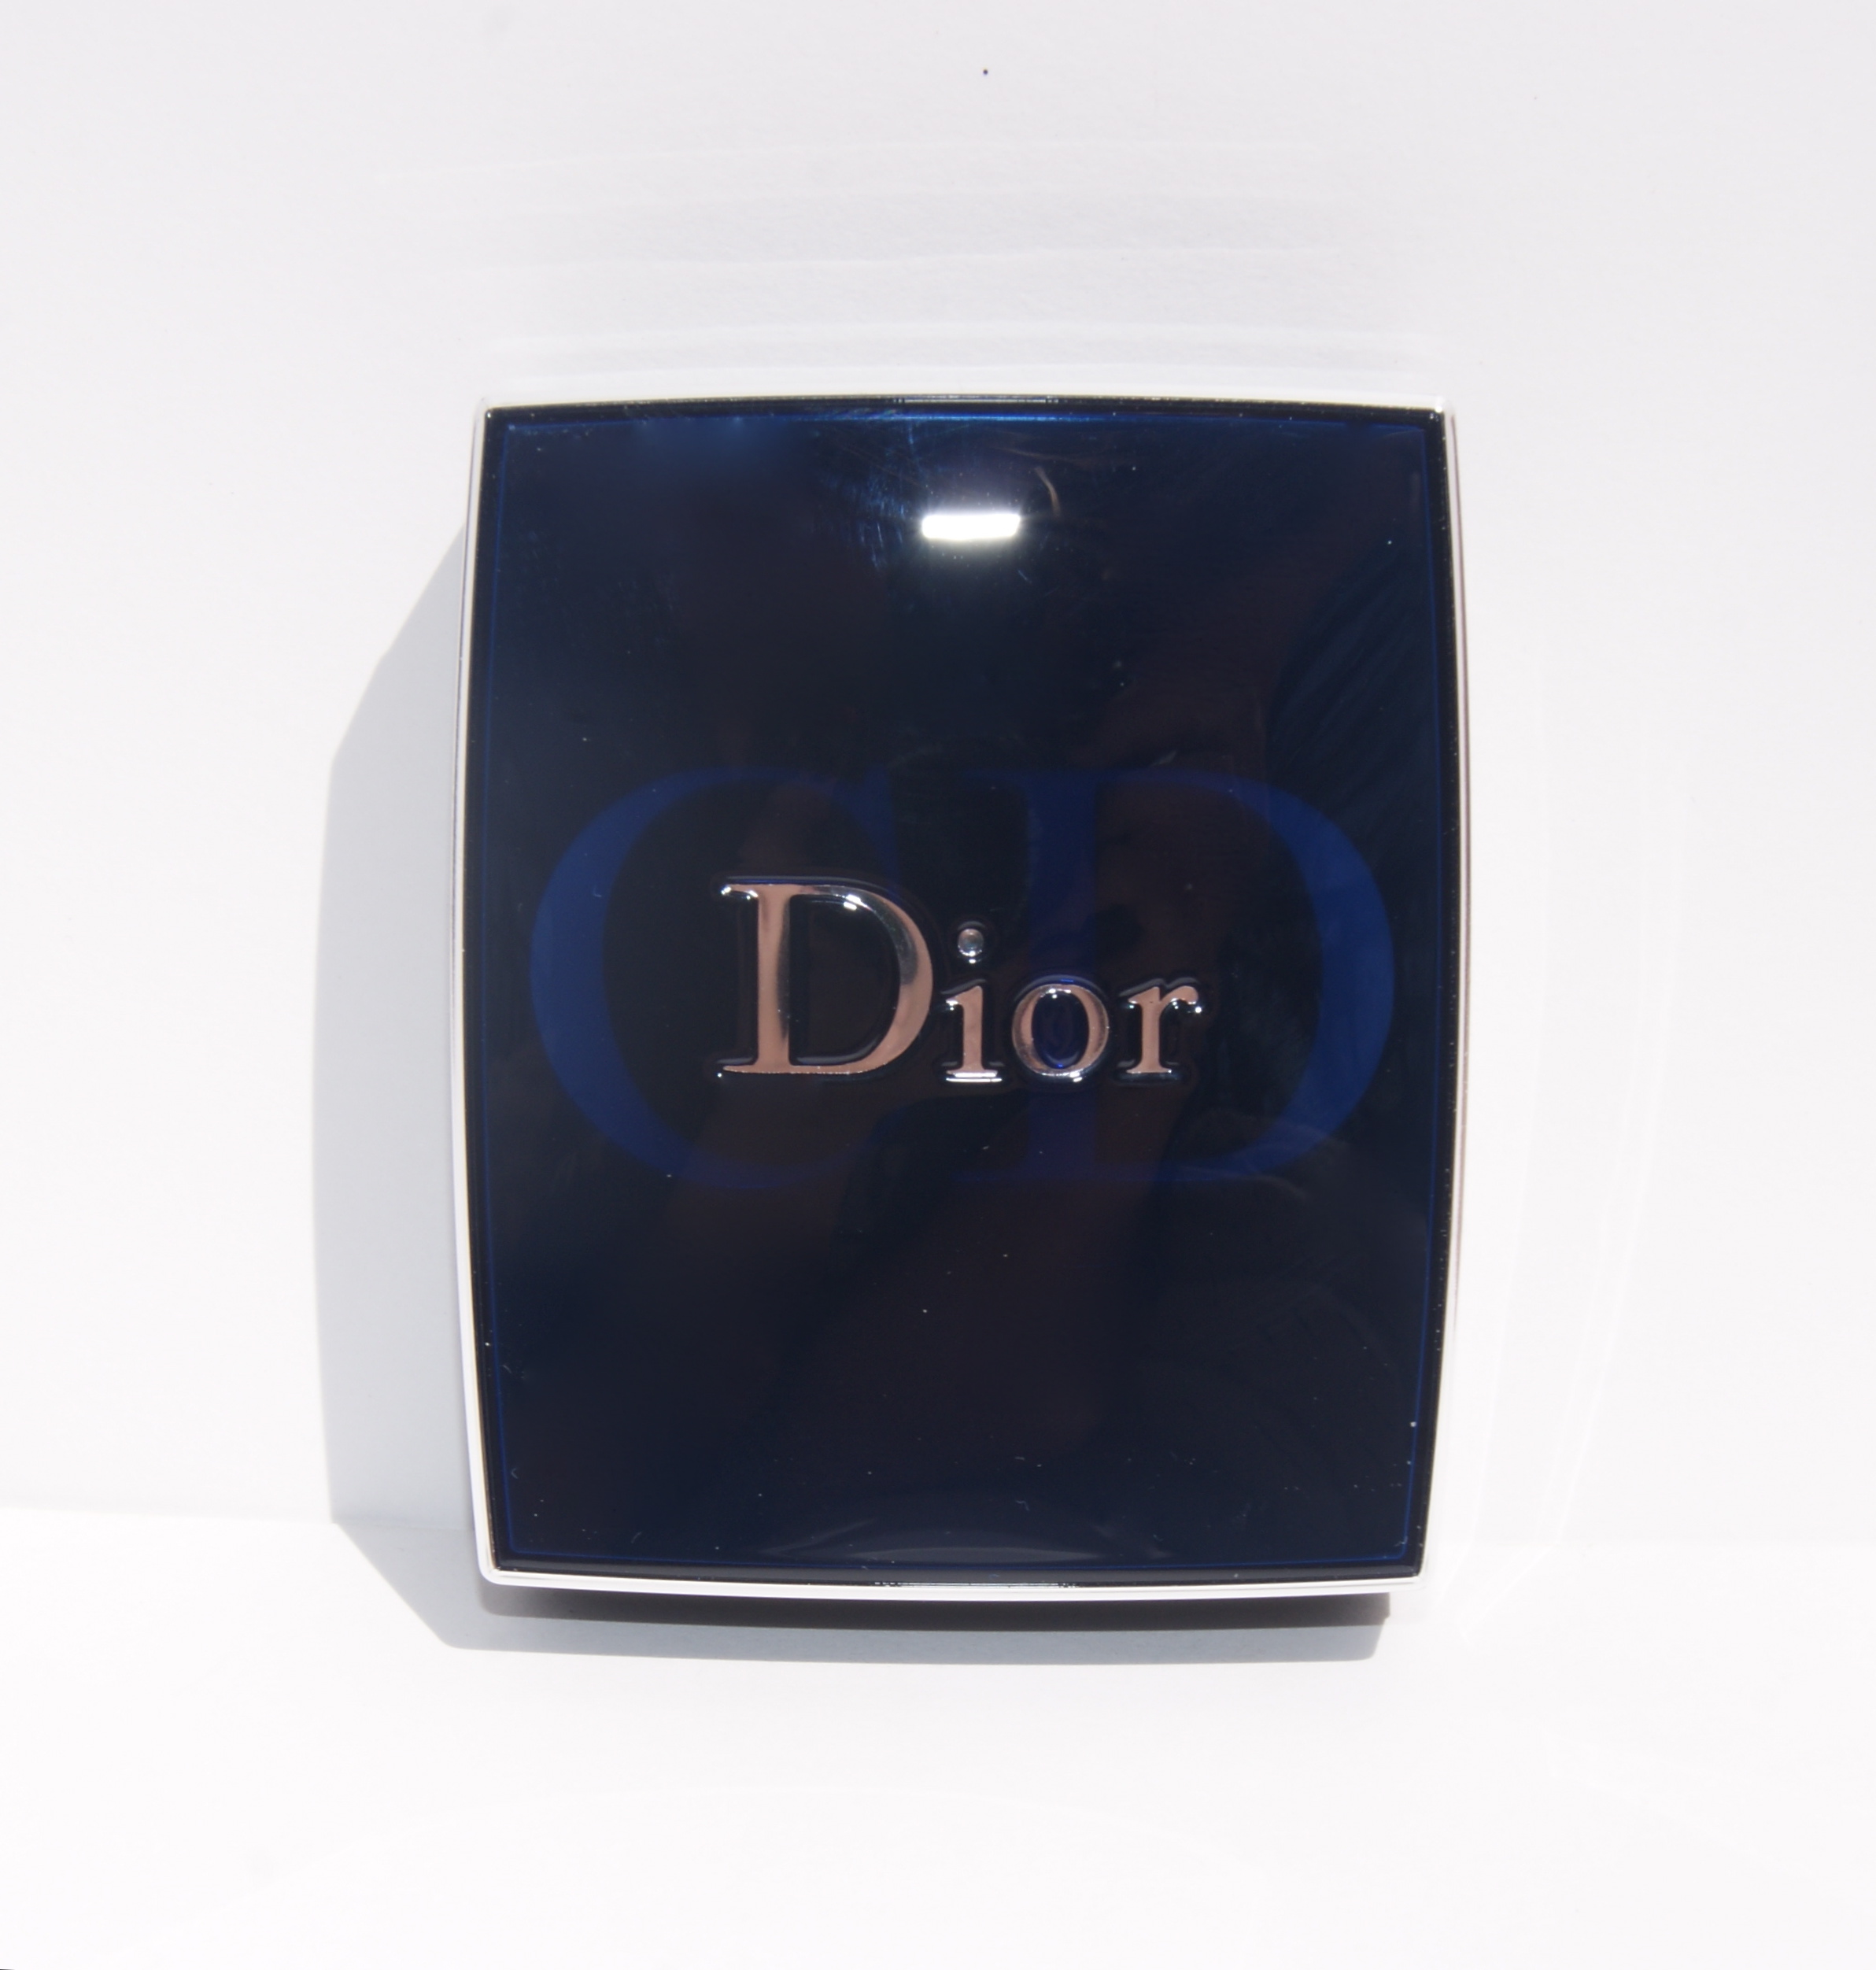 Dior 3 Couleurs Smoky Ready-To-Wear Smoky Eyes Palette in Smokey Nude